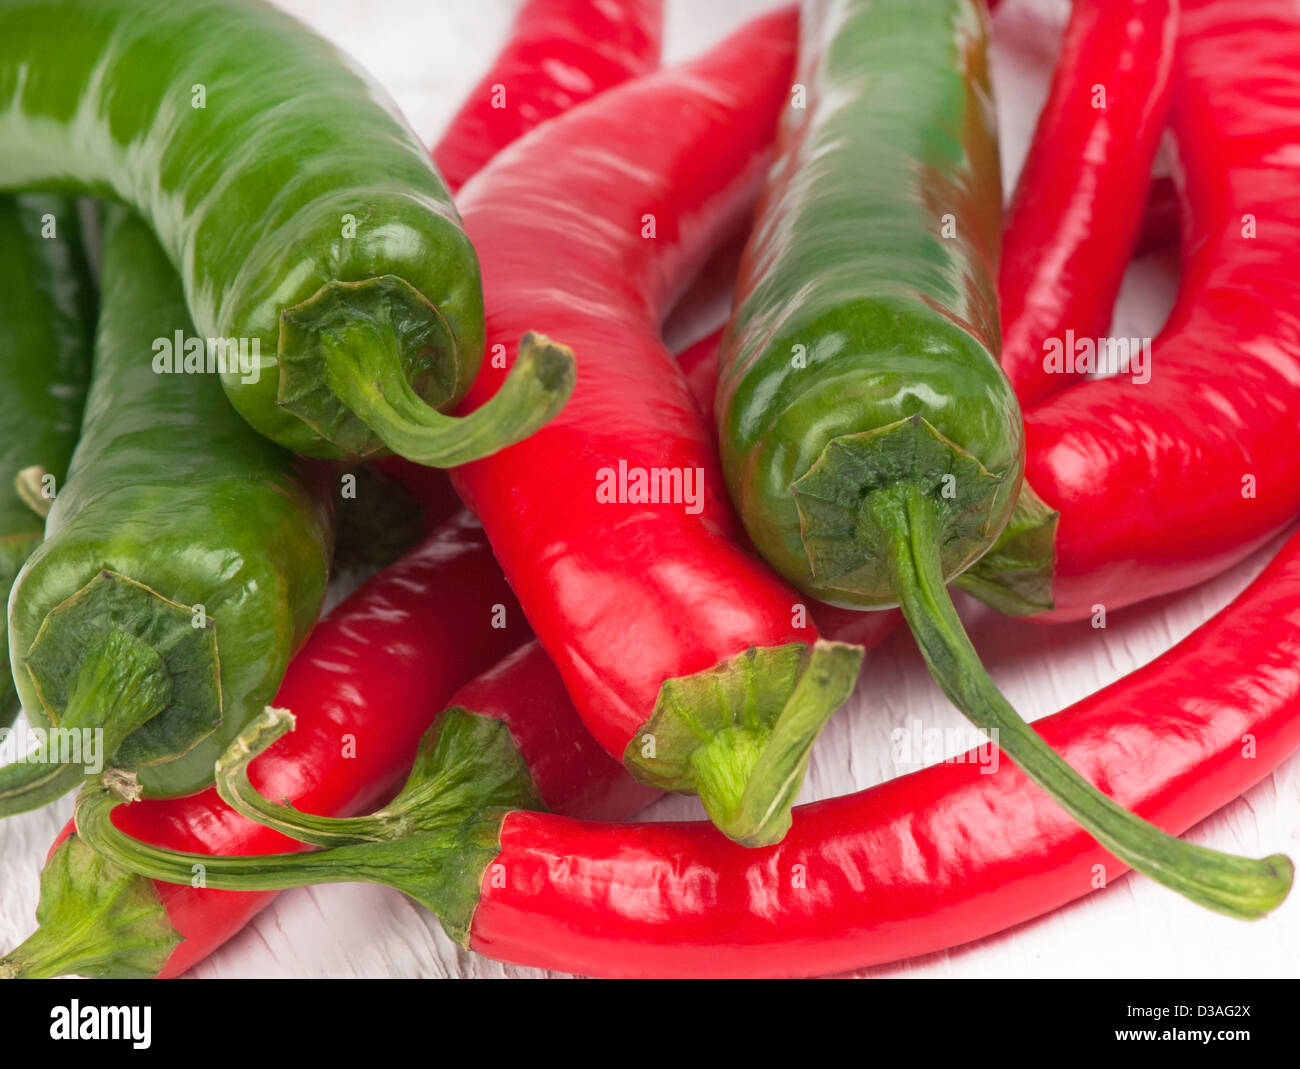 Macro of a pile of red and green hot chilli peppers. Stock Photo